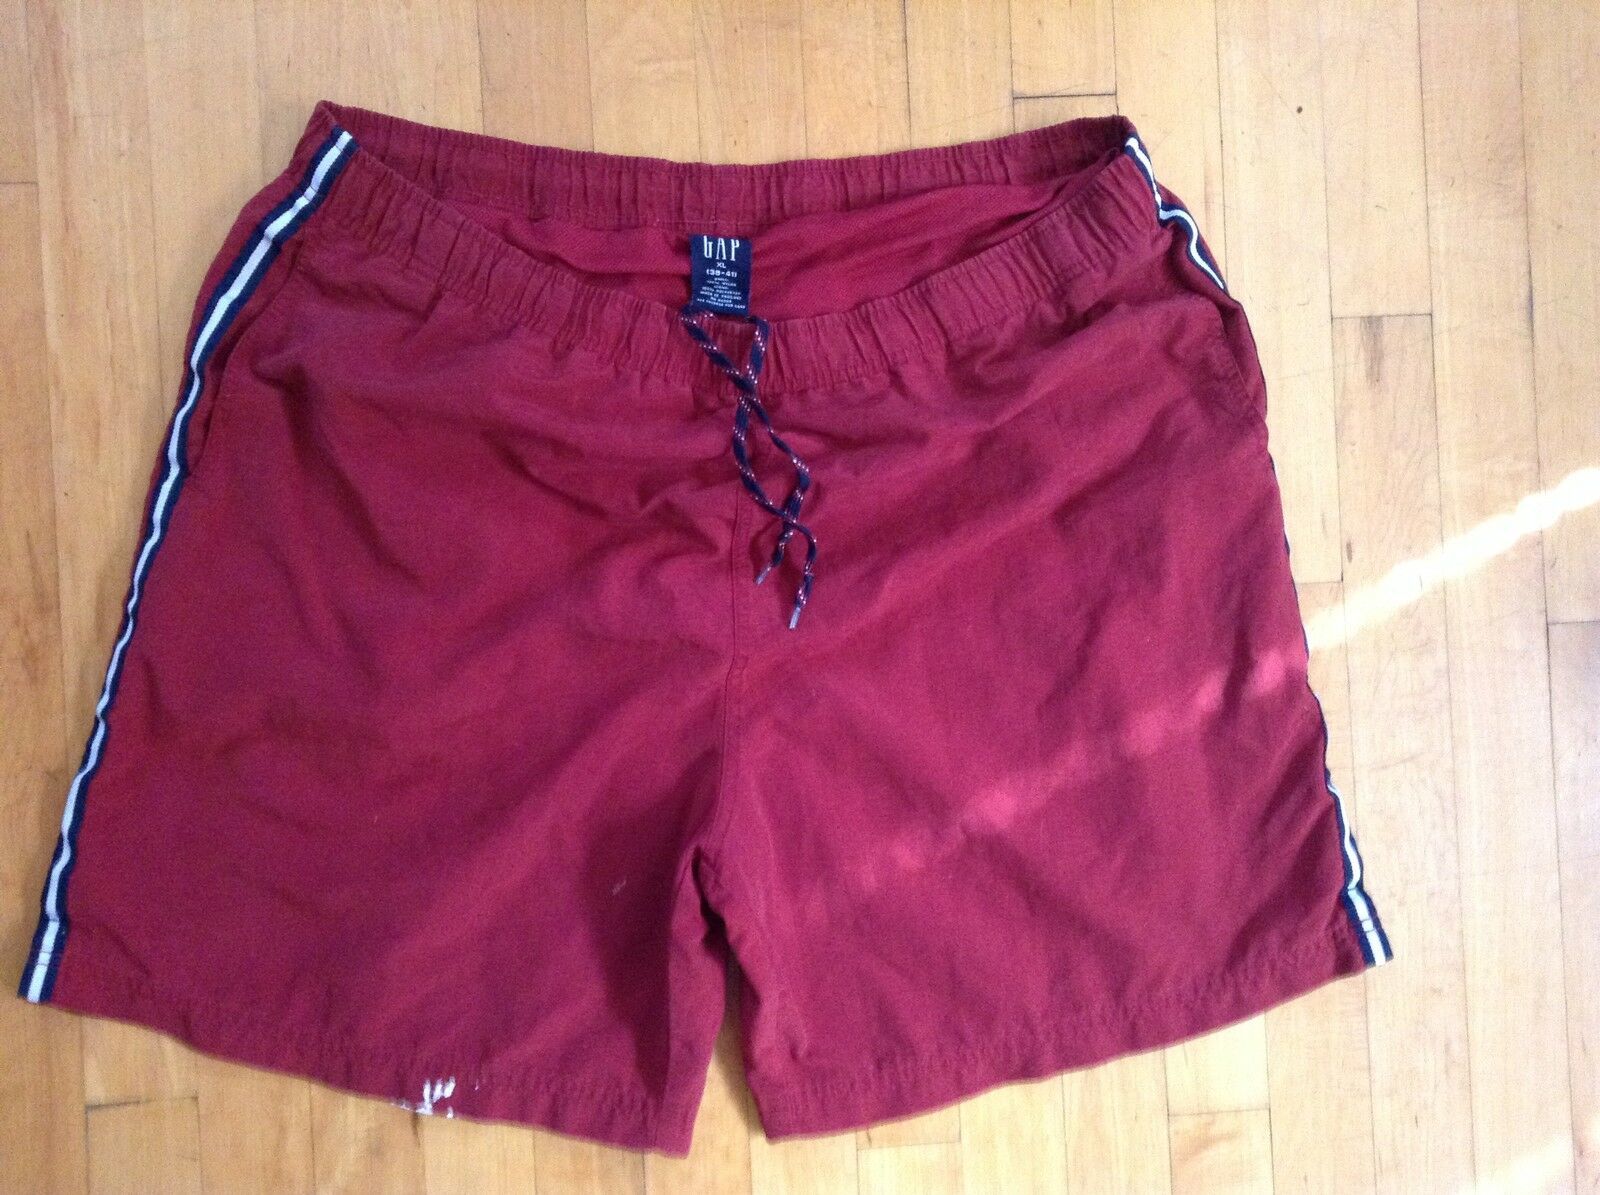 Gap Men's Red  Swimming Trunks/Shorts  Size XL 38-41 With Lining - $9.89